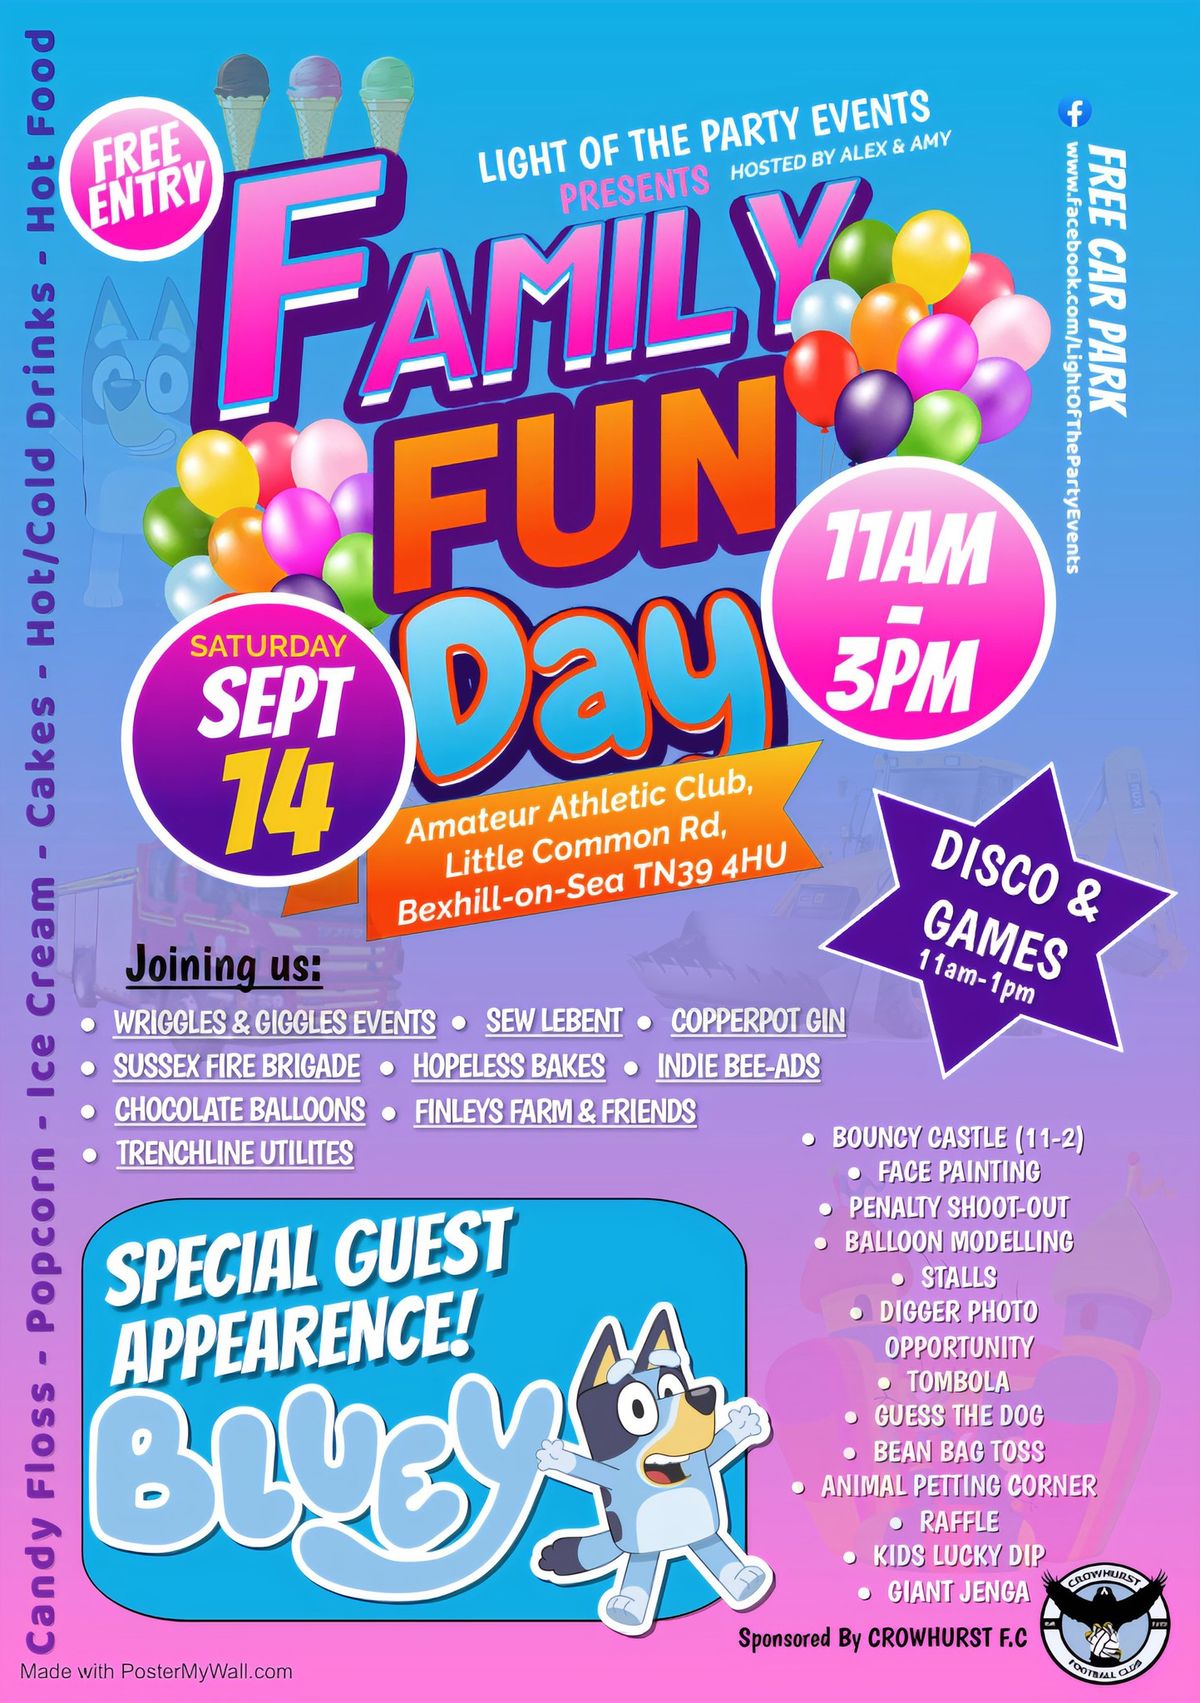 FAMILY FUN DAY - WITH SPECIAL GUEST BLUEY!! free entry!! (hosted by Light Of The Party Events)